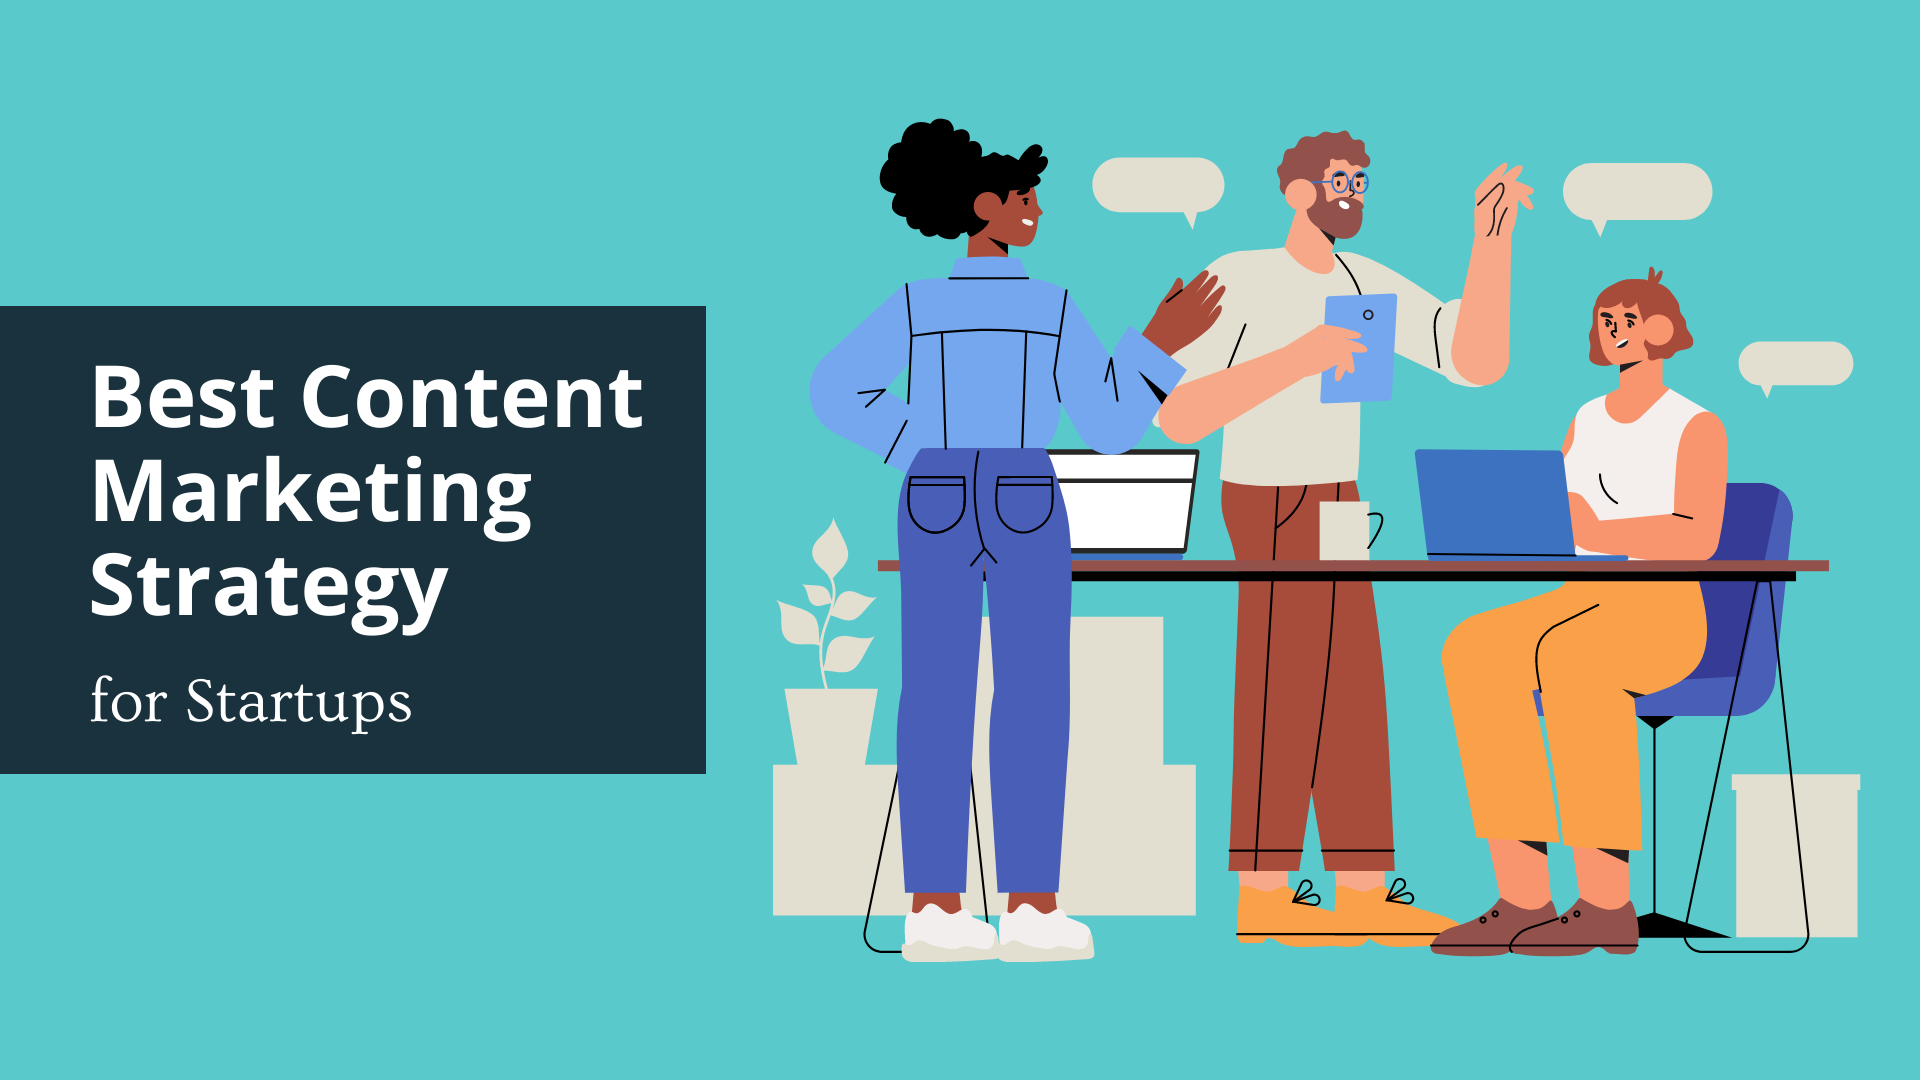 Best Content Marketing Strategy for Startups